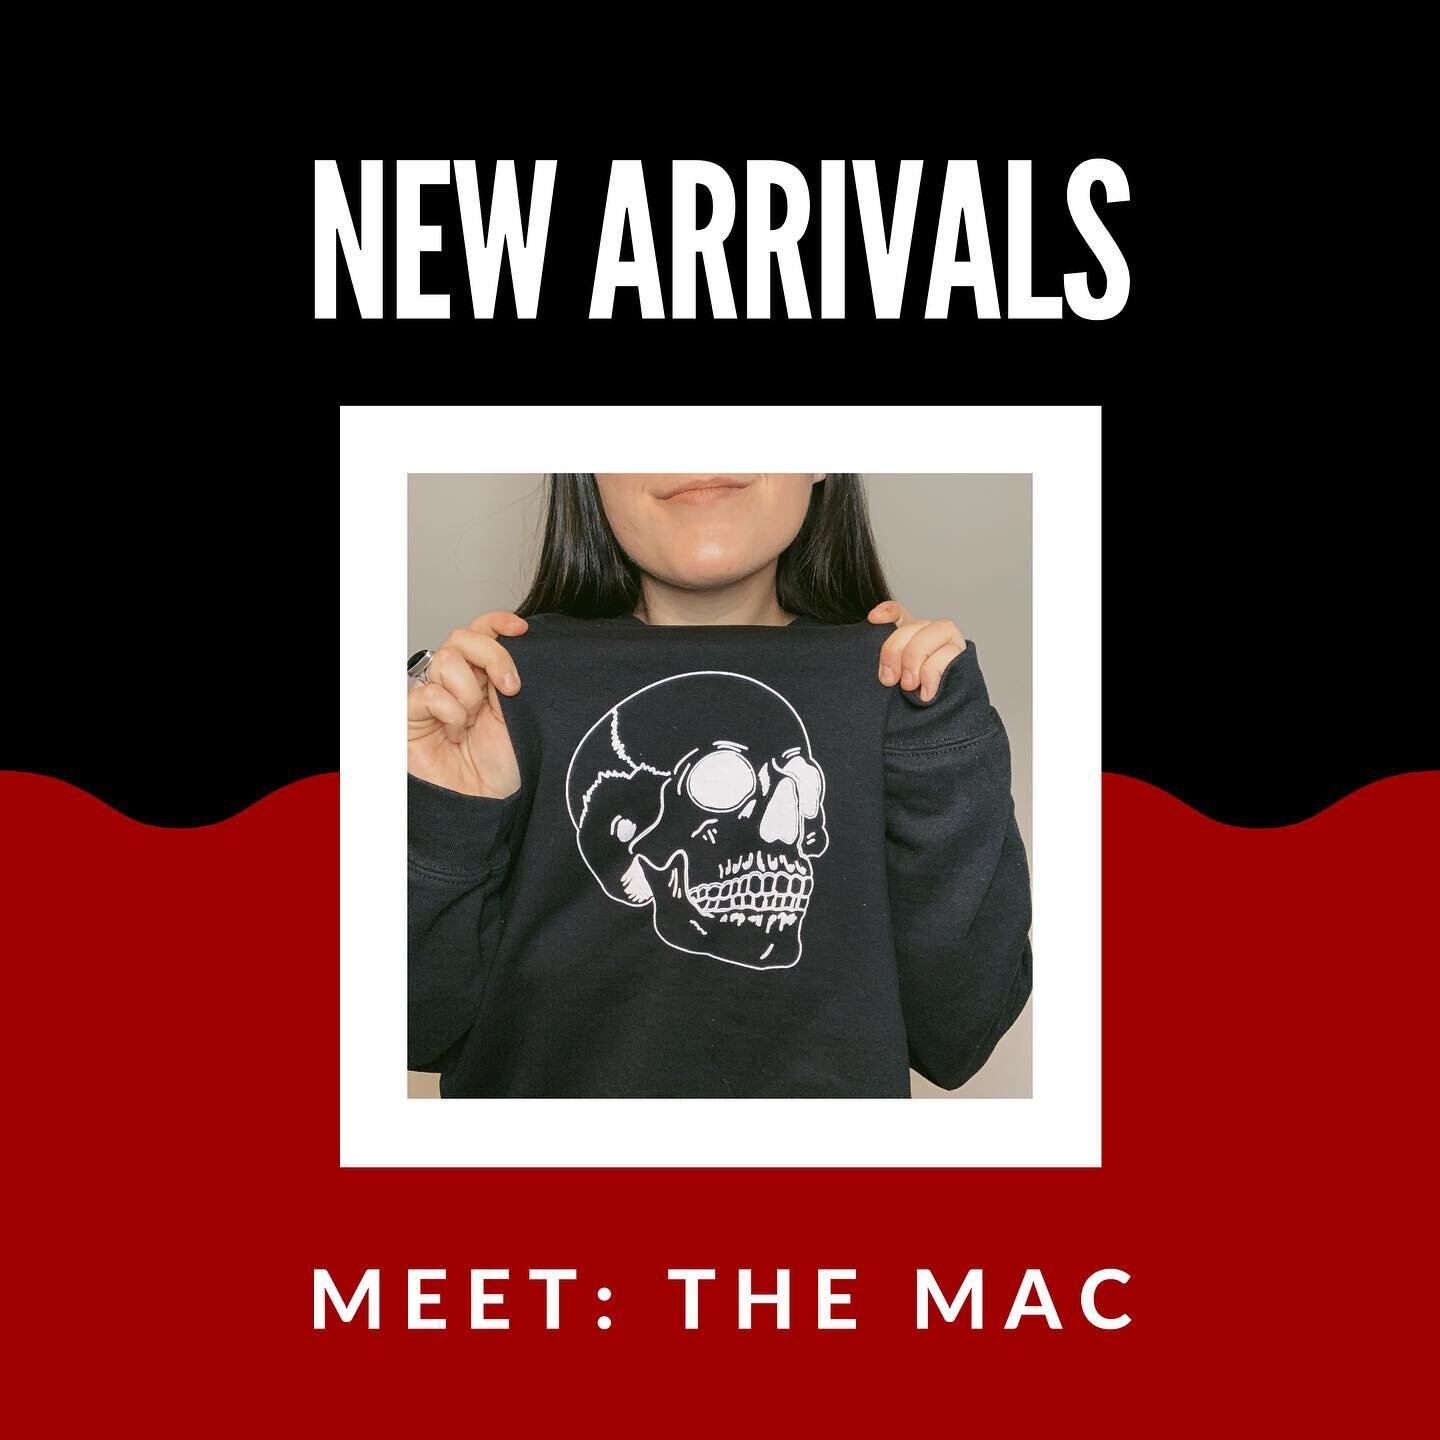 Meet: The Mac 💀

This design is available in:
✖️cropped tees
✖️basic tees
✖️long-sleeve tees
✖️crew necksssss

Stock is LIMITED, especially the sweatshirts. Snag one if you want one, and tag @rocklovelybones in your pictures so I can cry about how m